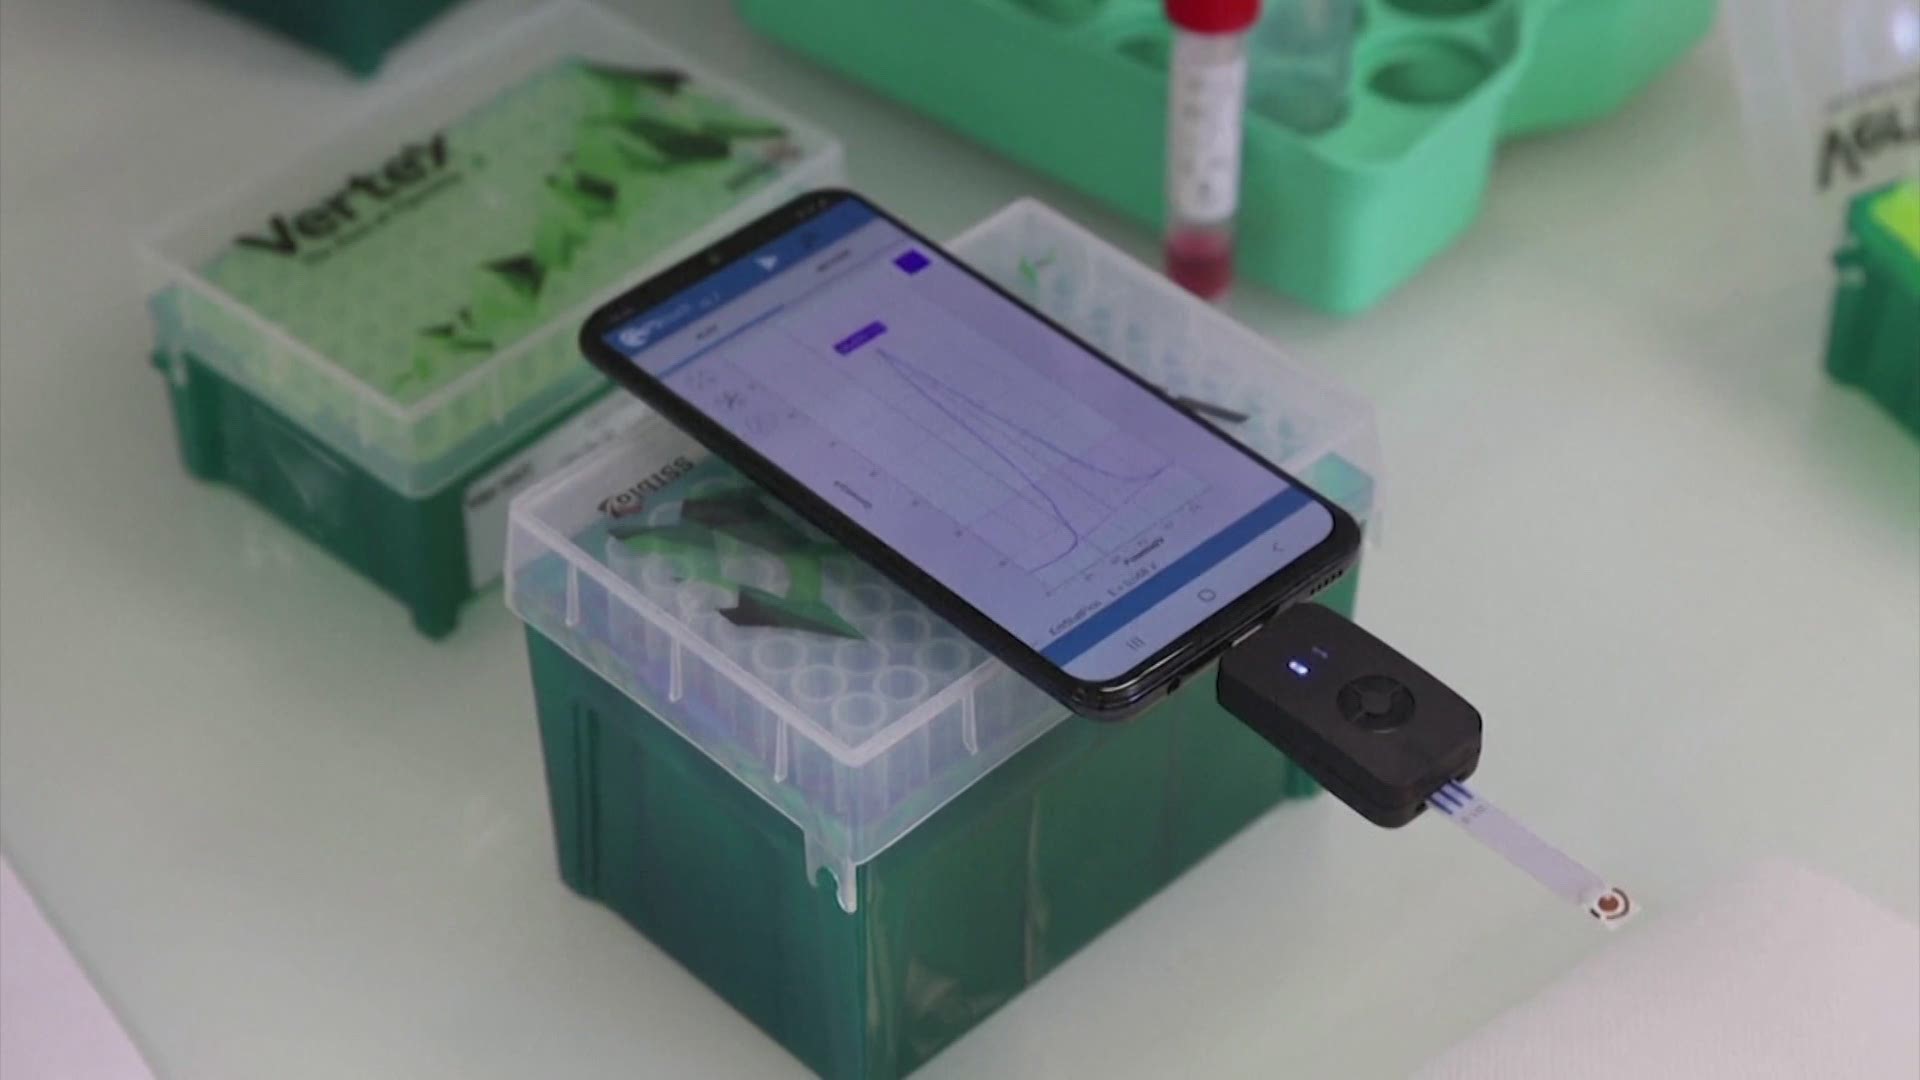 Researchers in France are developing a COVID-19 test that can connect with the smartphone and delivers results within minutes. Initial trials showed 98% accuracy.